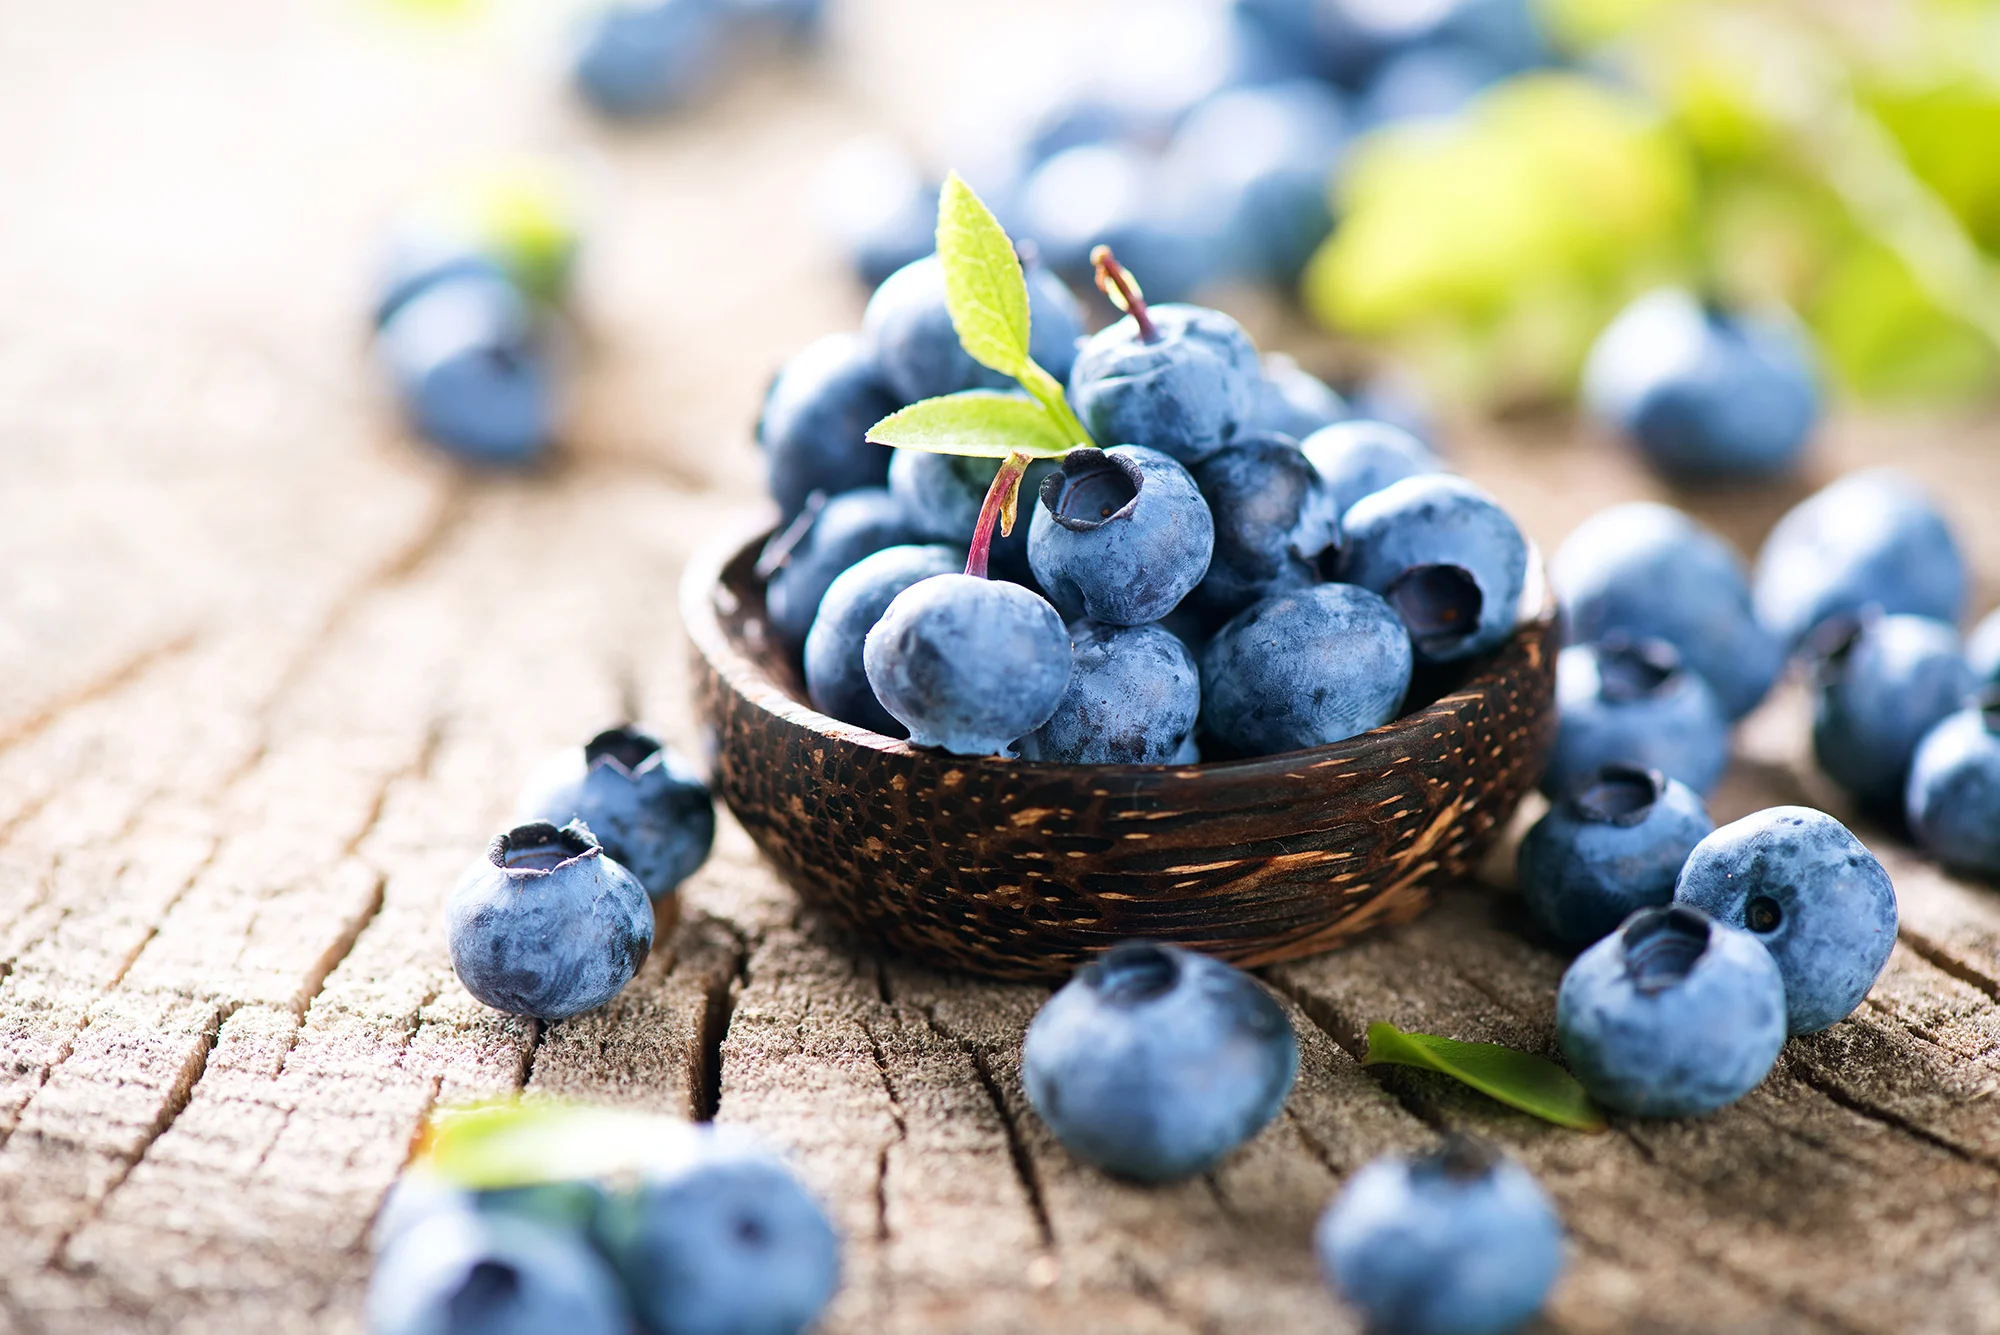 Blueberries: The 